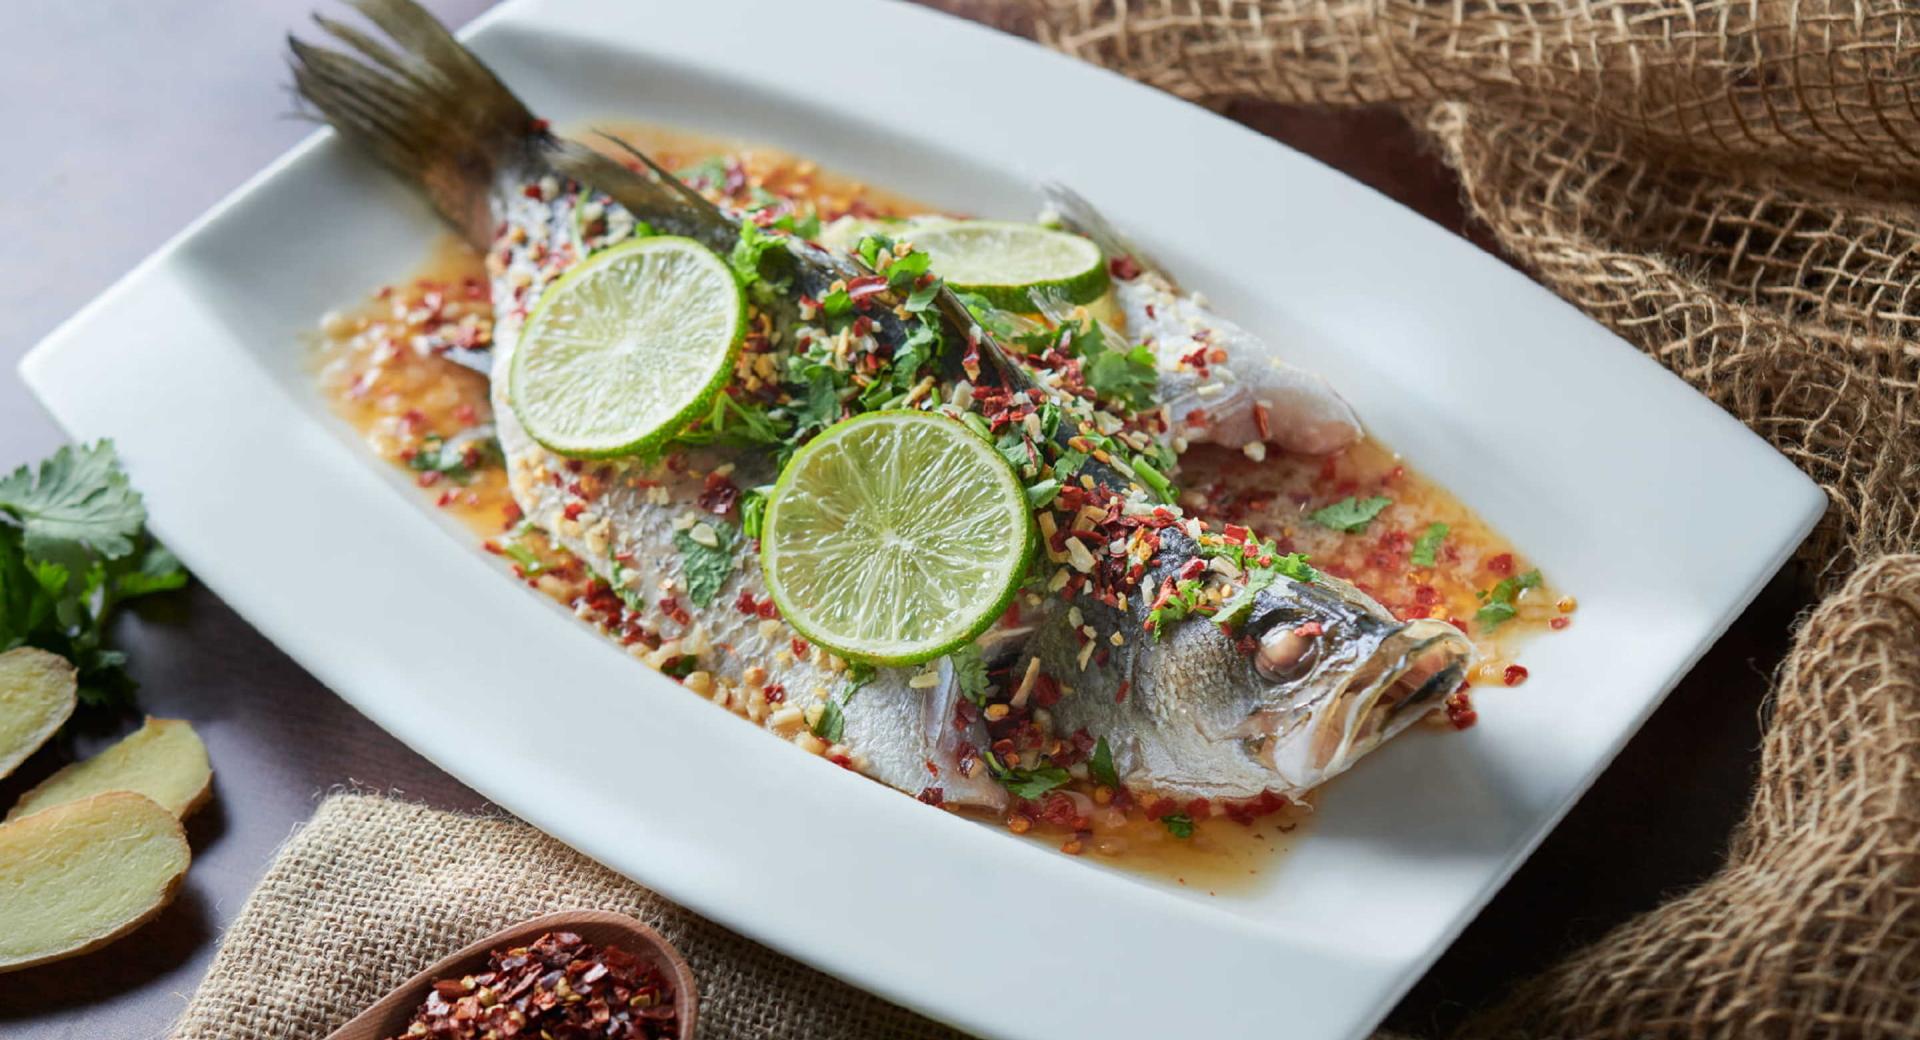 Thai style steamed fish